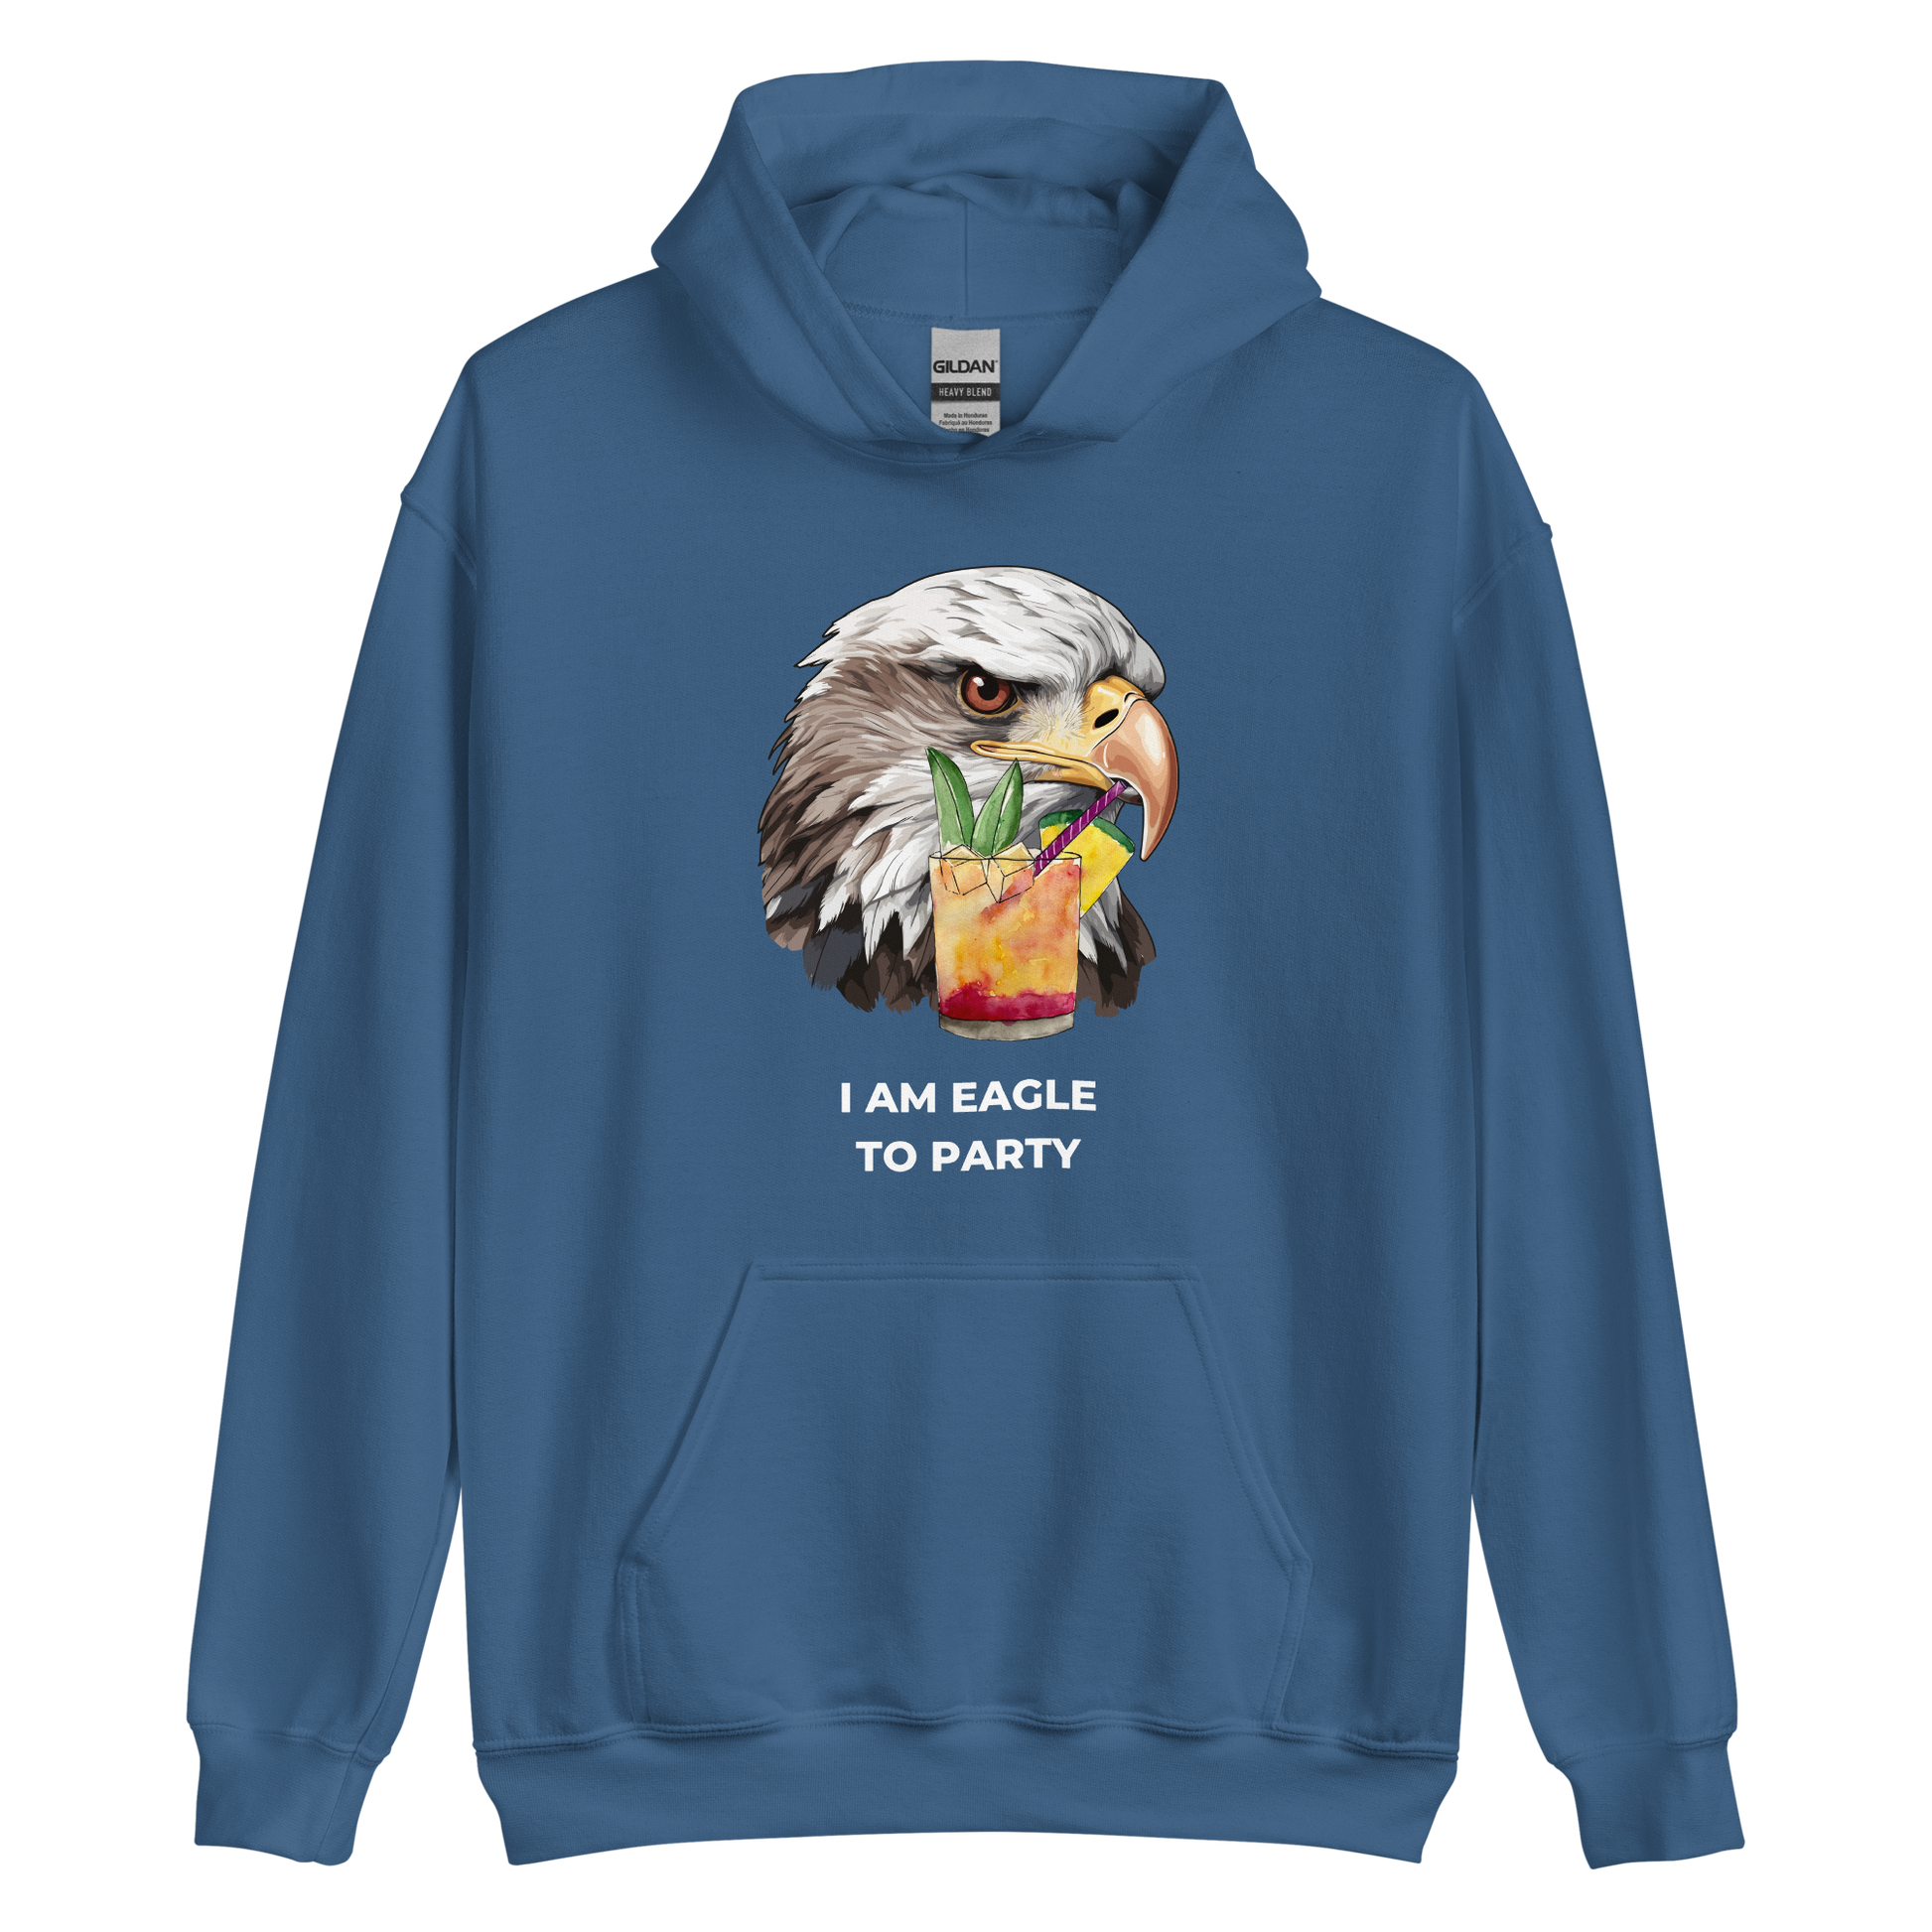 Indigo Blue Eagle Hoodie featuring a captivating I Am Eagle To Party graphic on the chest - Funny Graphic Eagle Party Hoodies - Boozy Fox